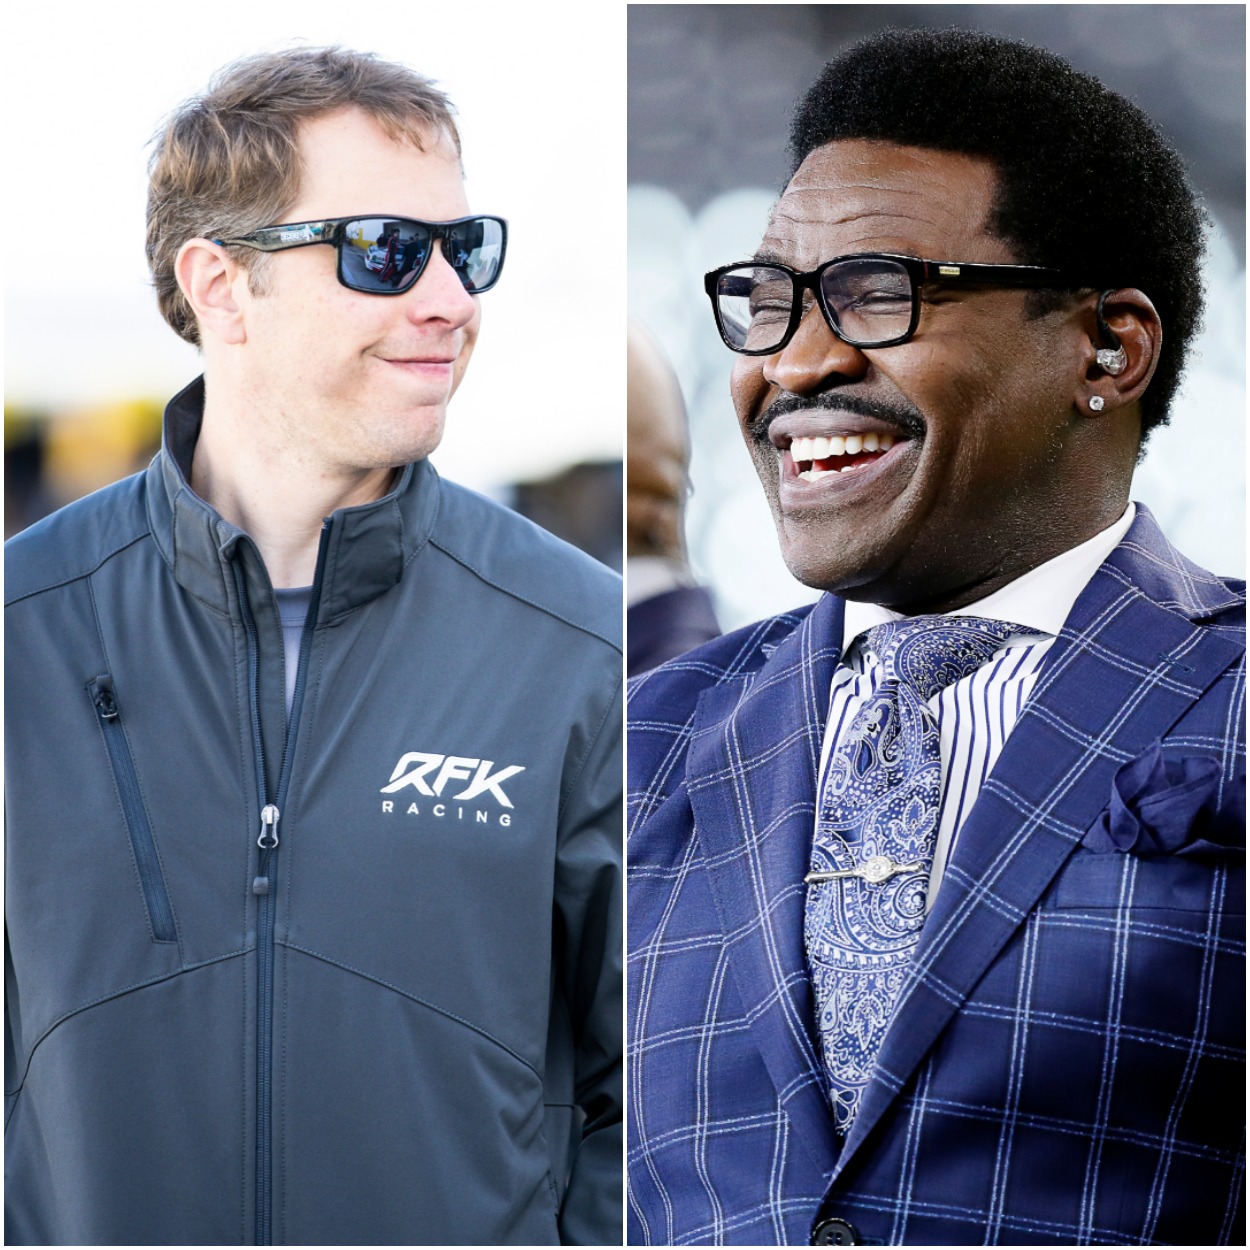 Brad Keselowski Reveals Embarrassing Story About Former Dallas Cowboys Star Michael Irvin With Hopes Hall of Fame Receiver ‘Doesn’t Want to Beat Me Up for Telling This Story’